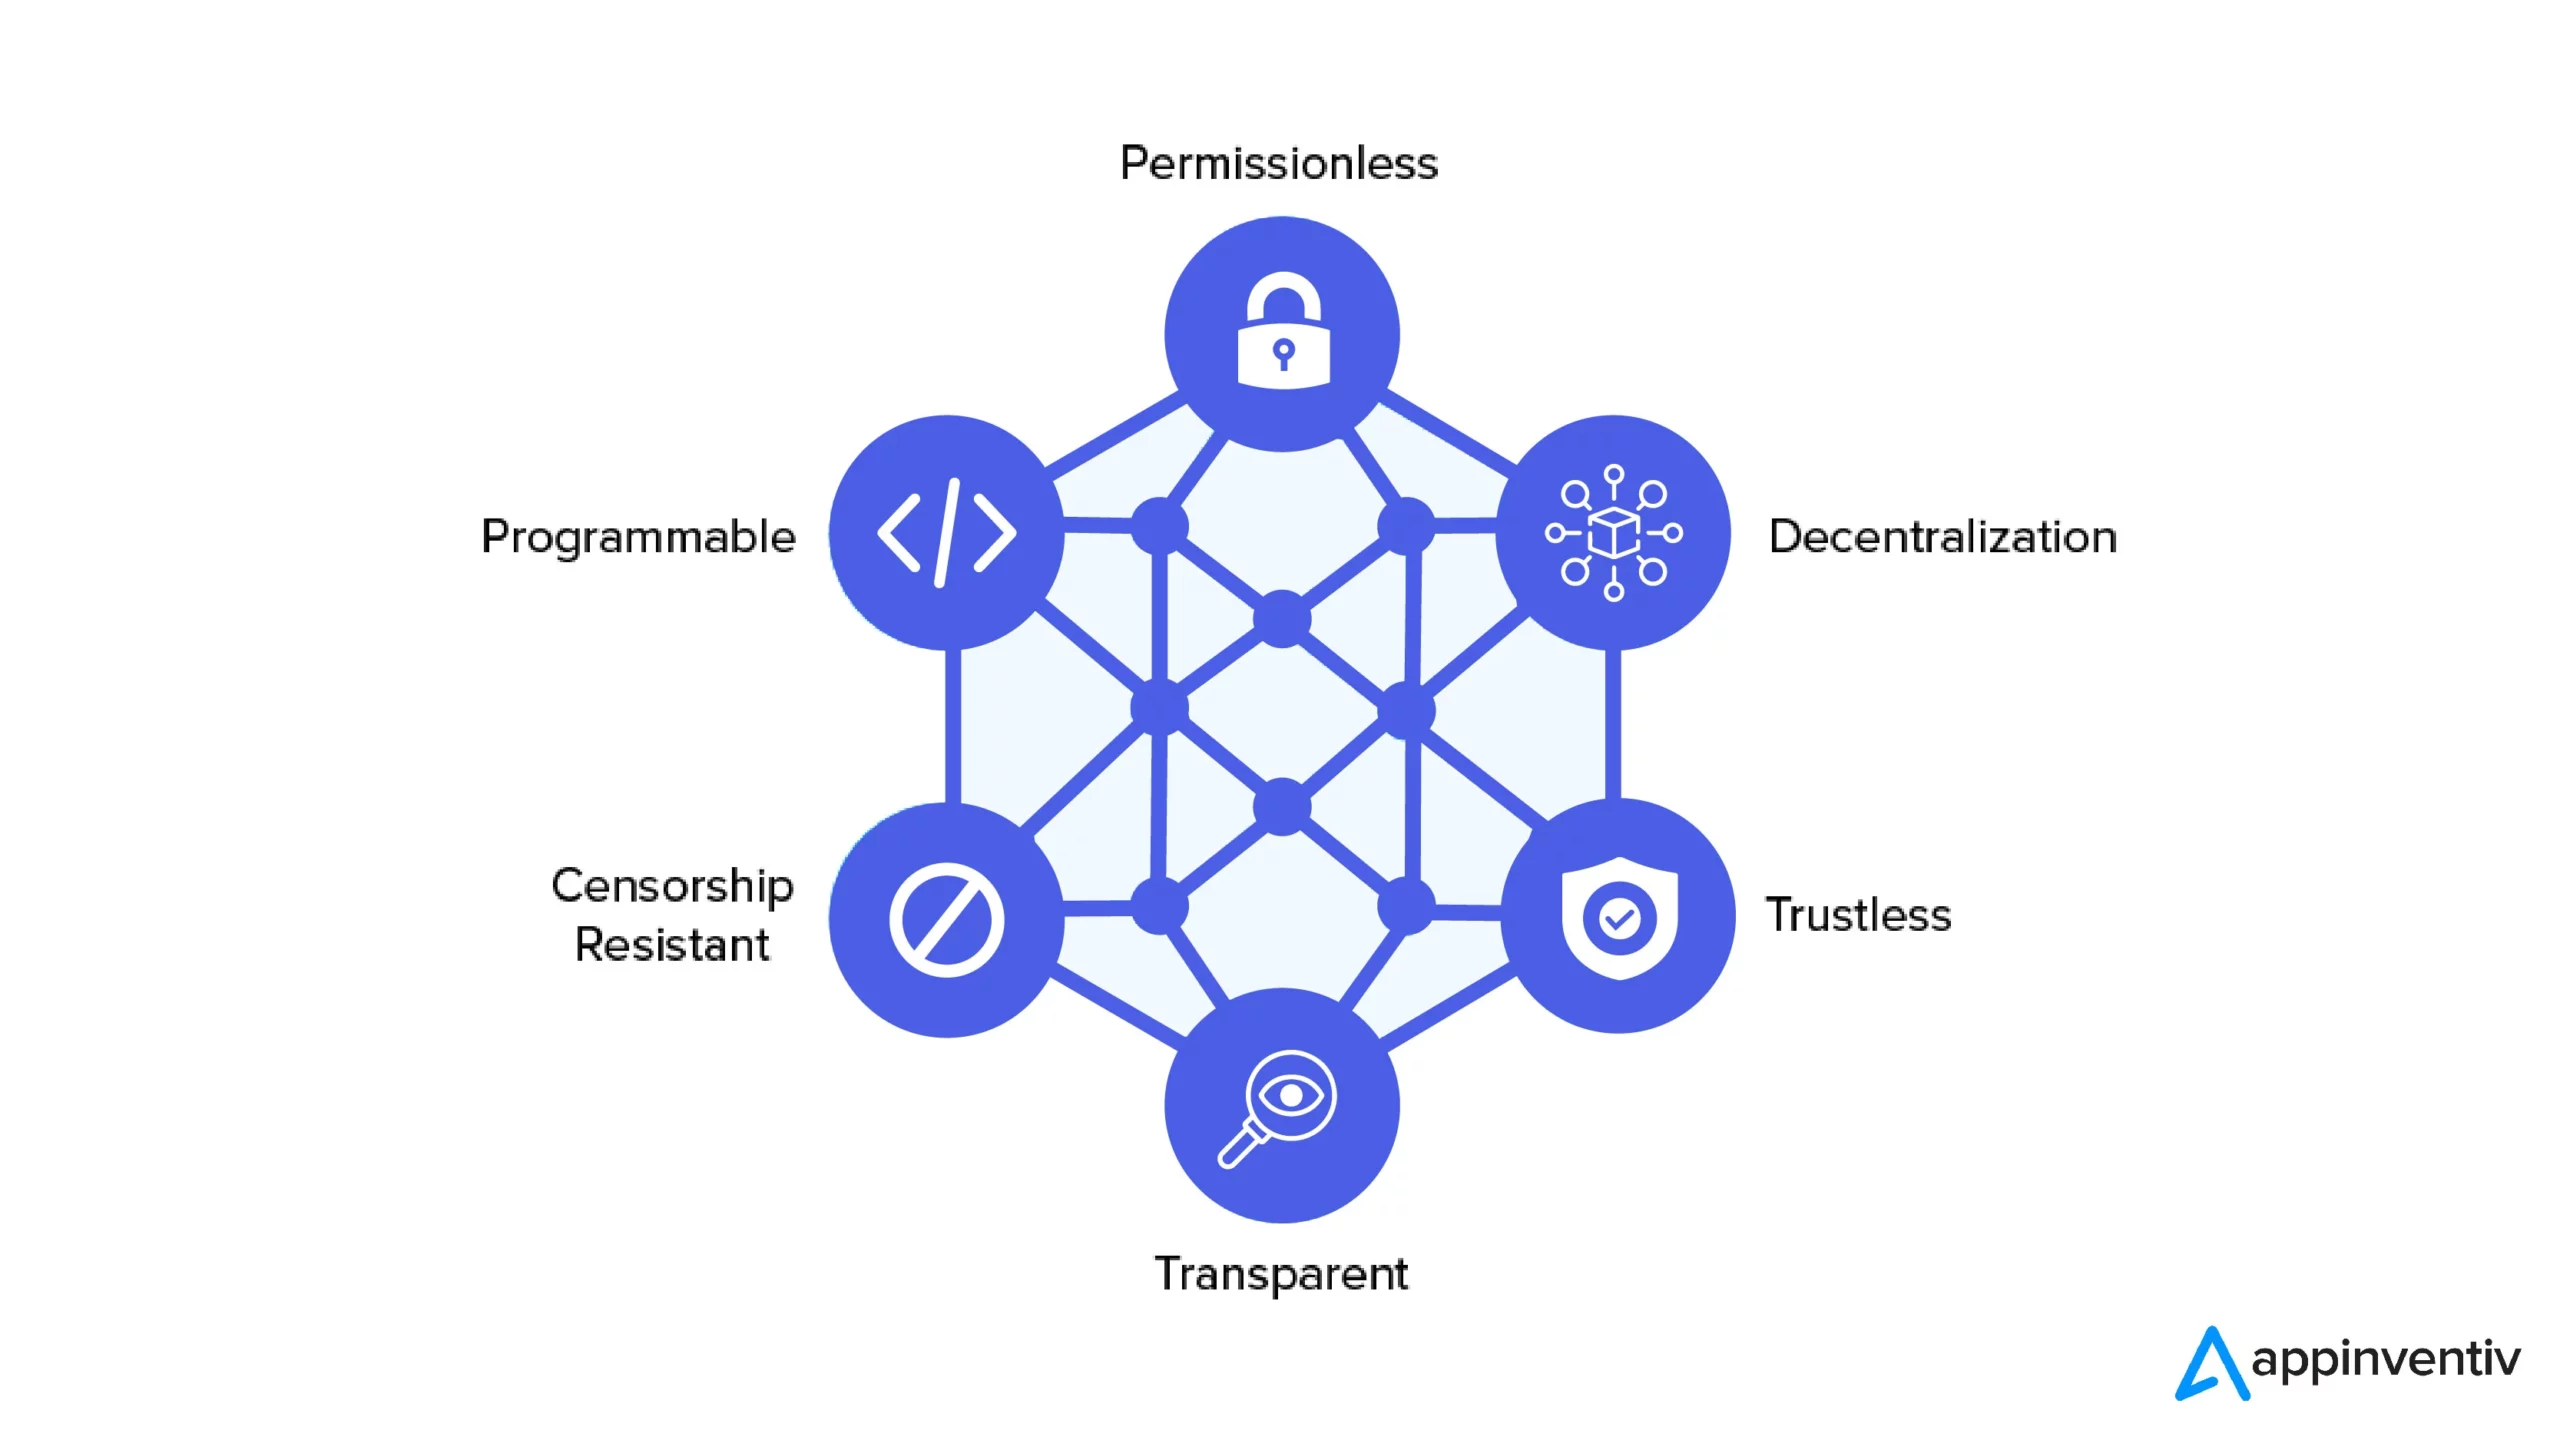 Benefits of Decentralization and Distributed Governance